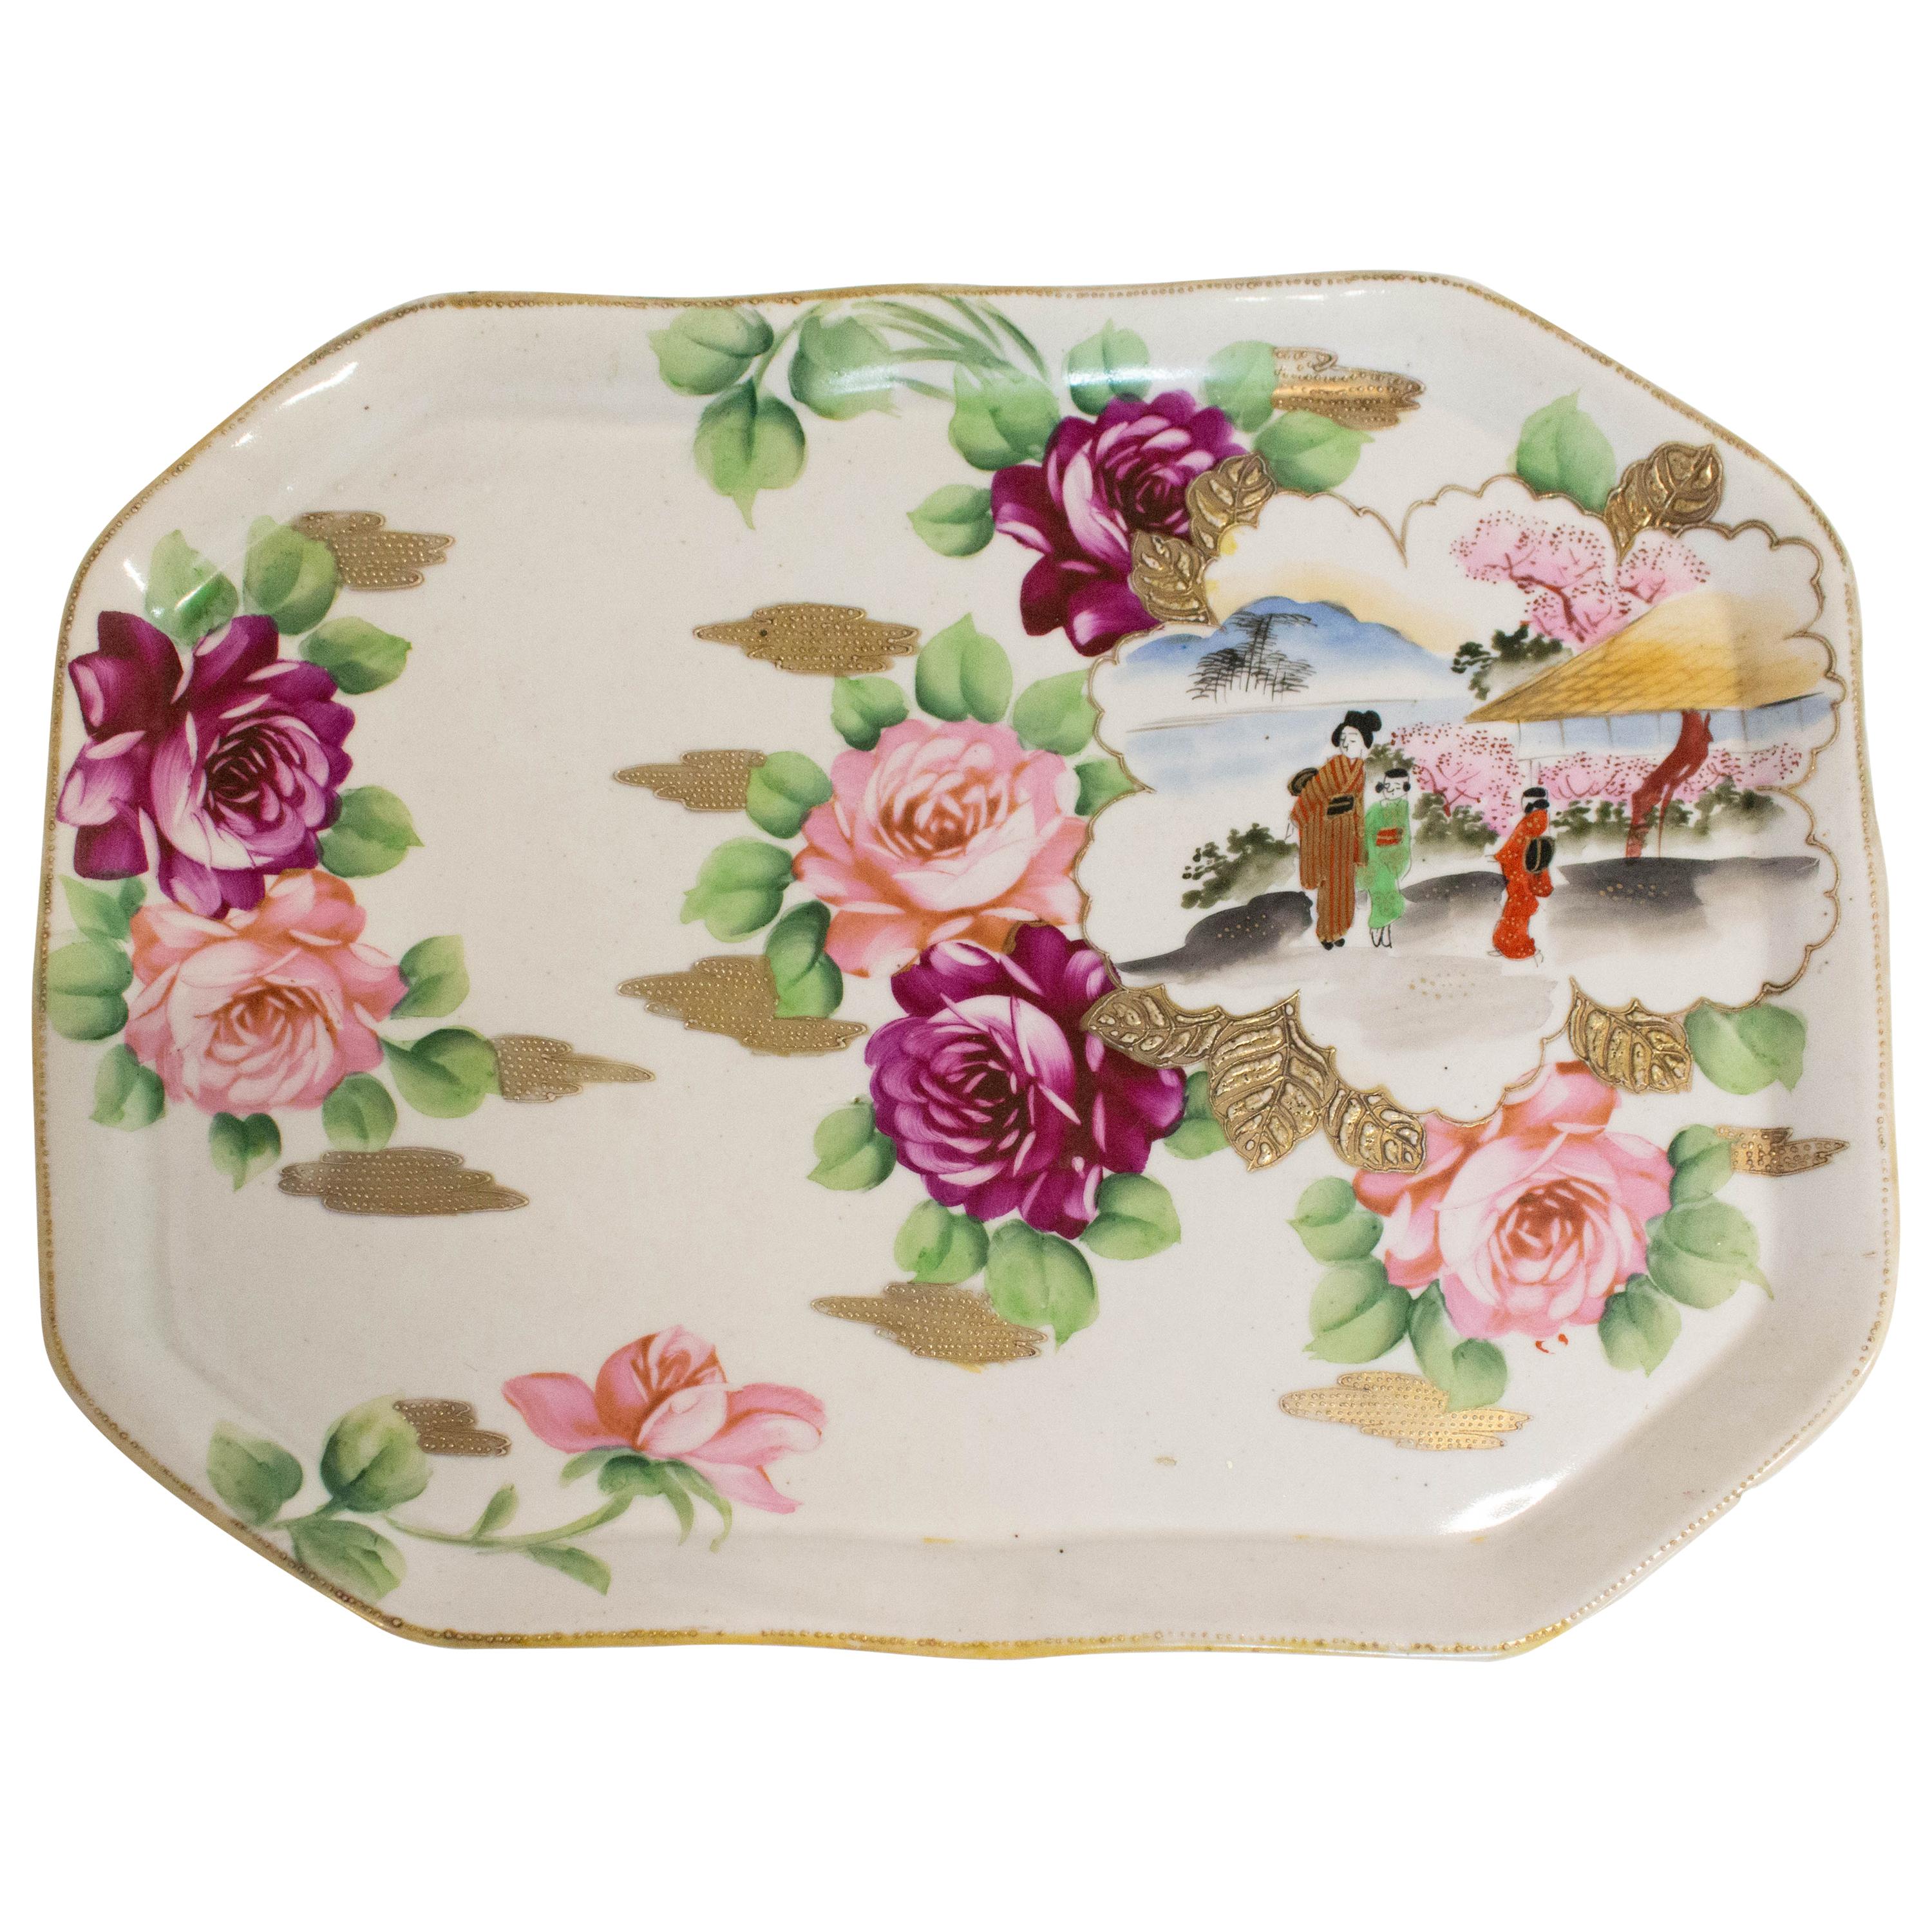 Chinoiserie Hand Painted Porcelain Plate or Tray, Late 19th Century